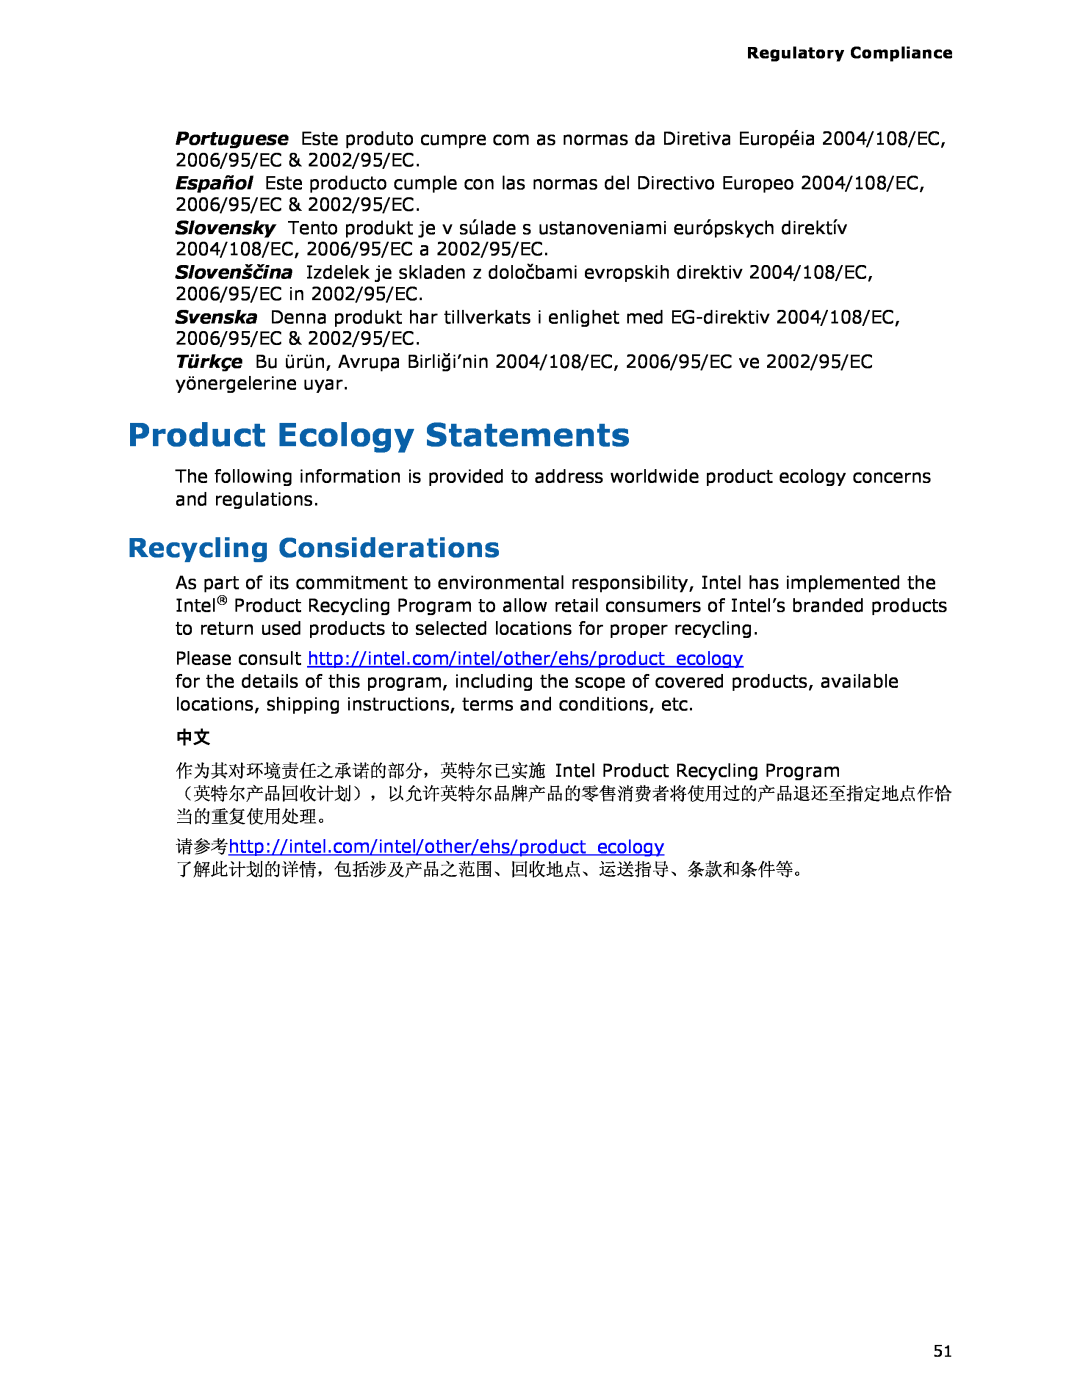 Intel D425KT manual Product Ecology Statements, Recycling Considerations 